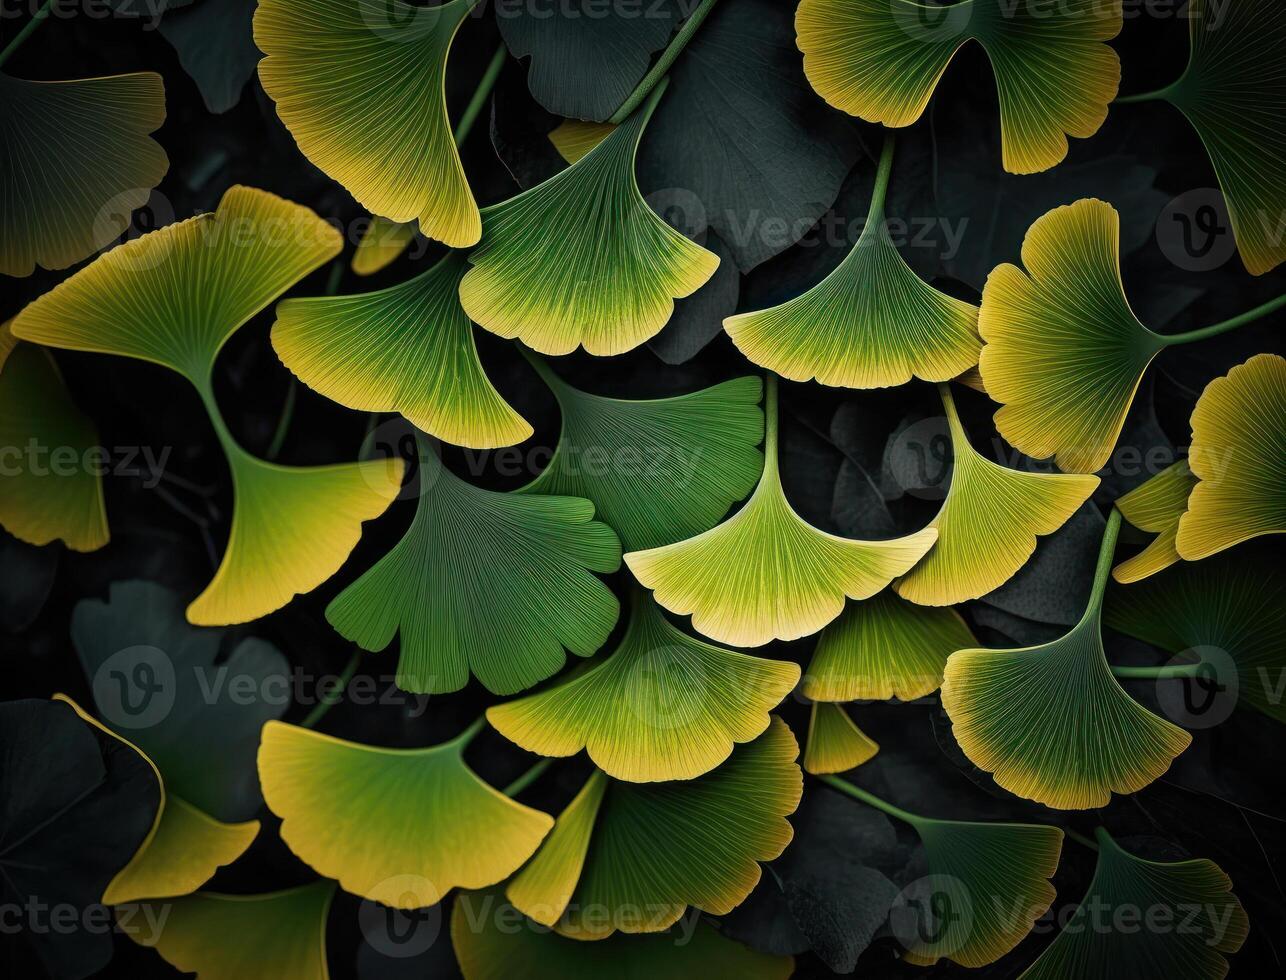 Ginkgo biloba green leaves background created with technology photo